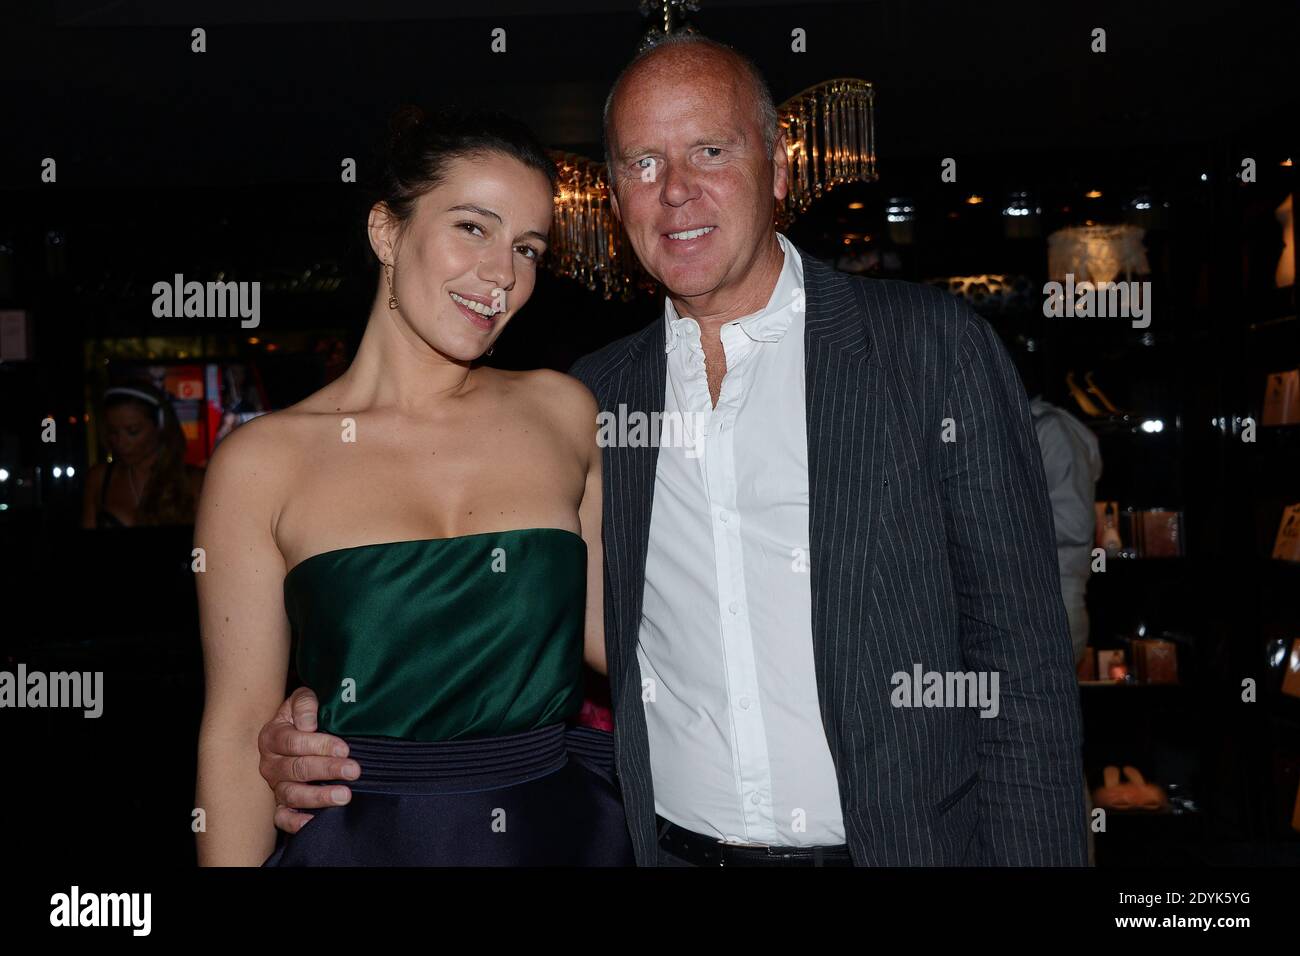 French actress Zoe Felix and 'Agent Provocateur' CEO Gary Hogarth at 'Agent  Provocateur' store opening in Cannes as part of the 66th Cannes film  festival in Cannes, France on May 17, 2013.